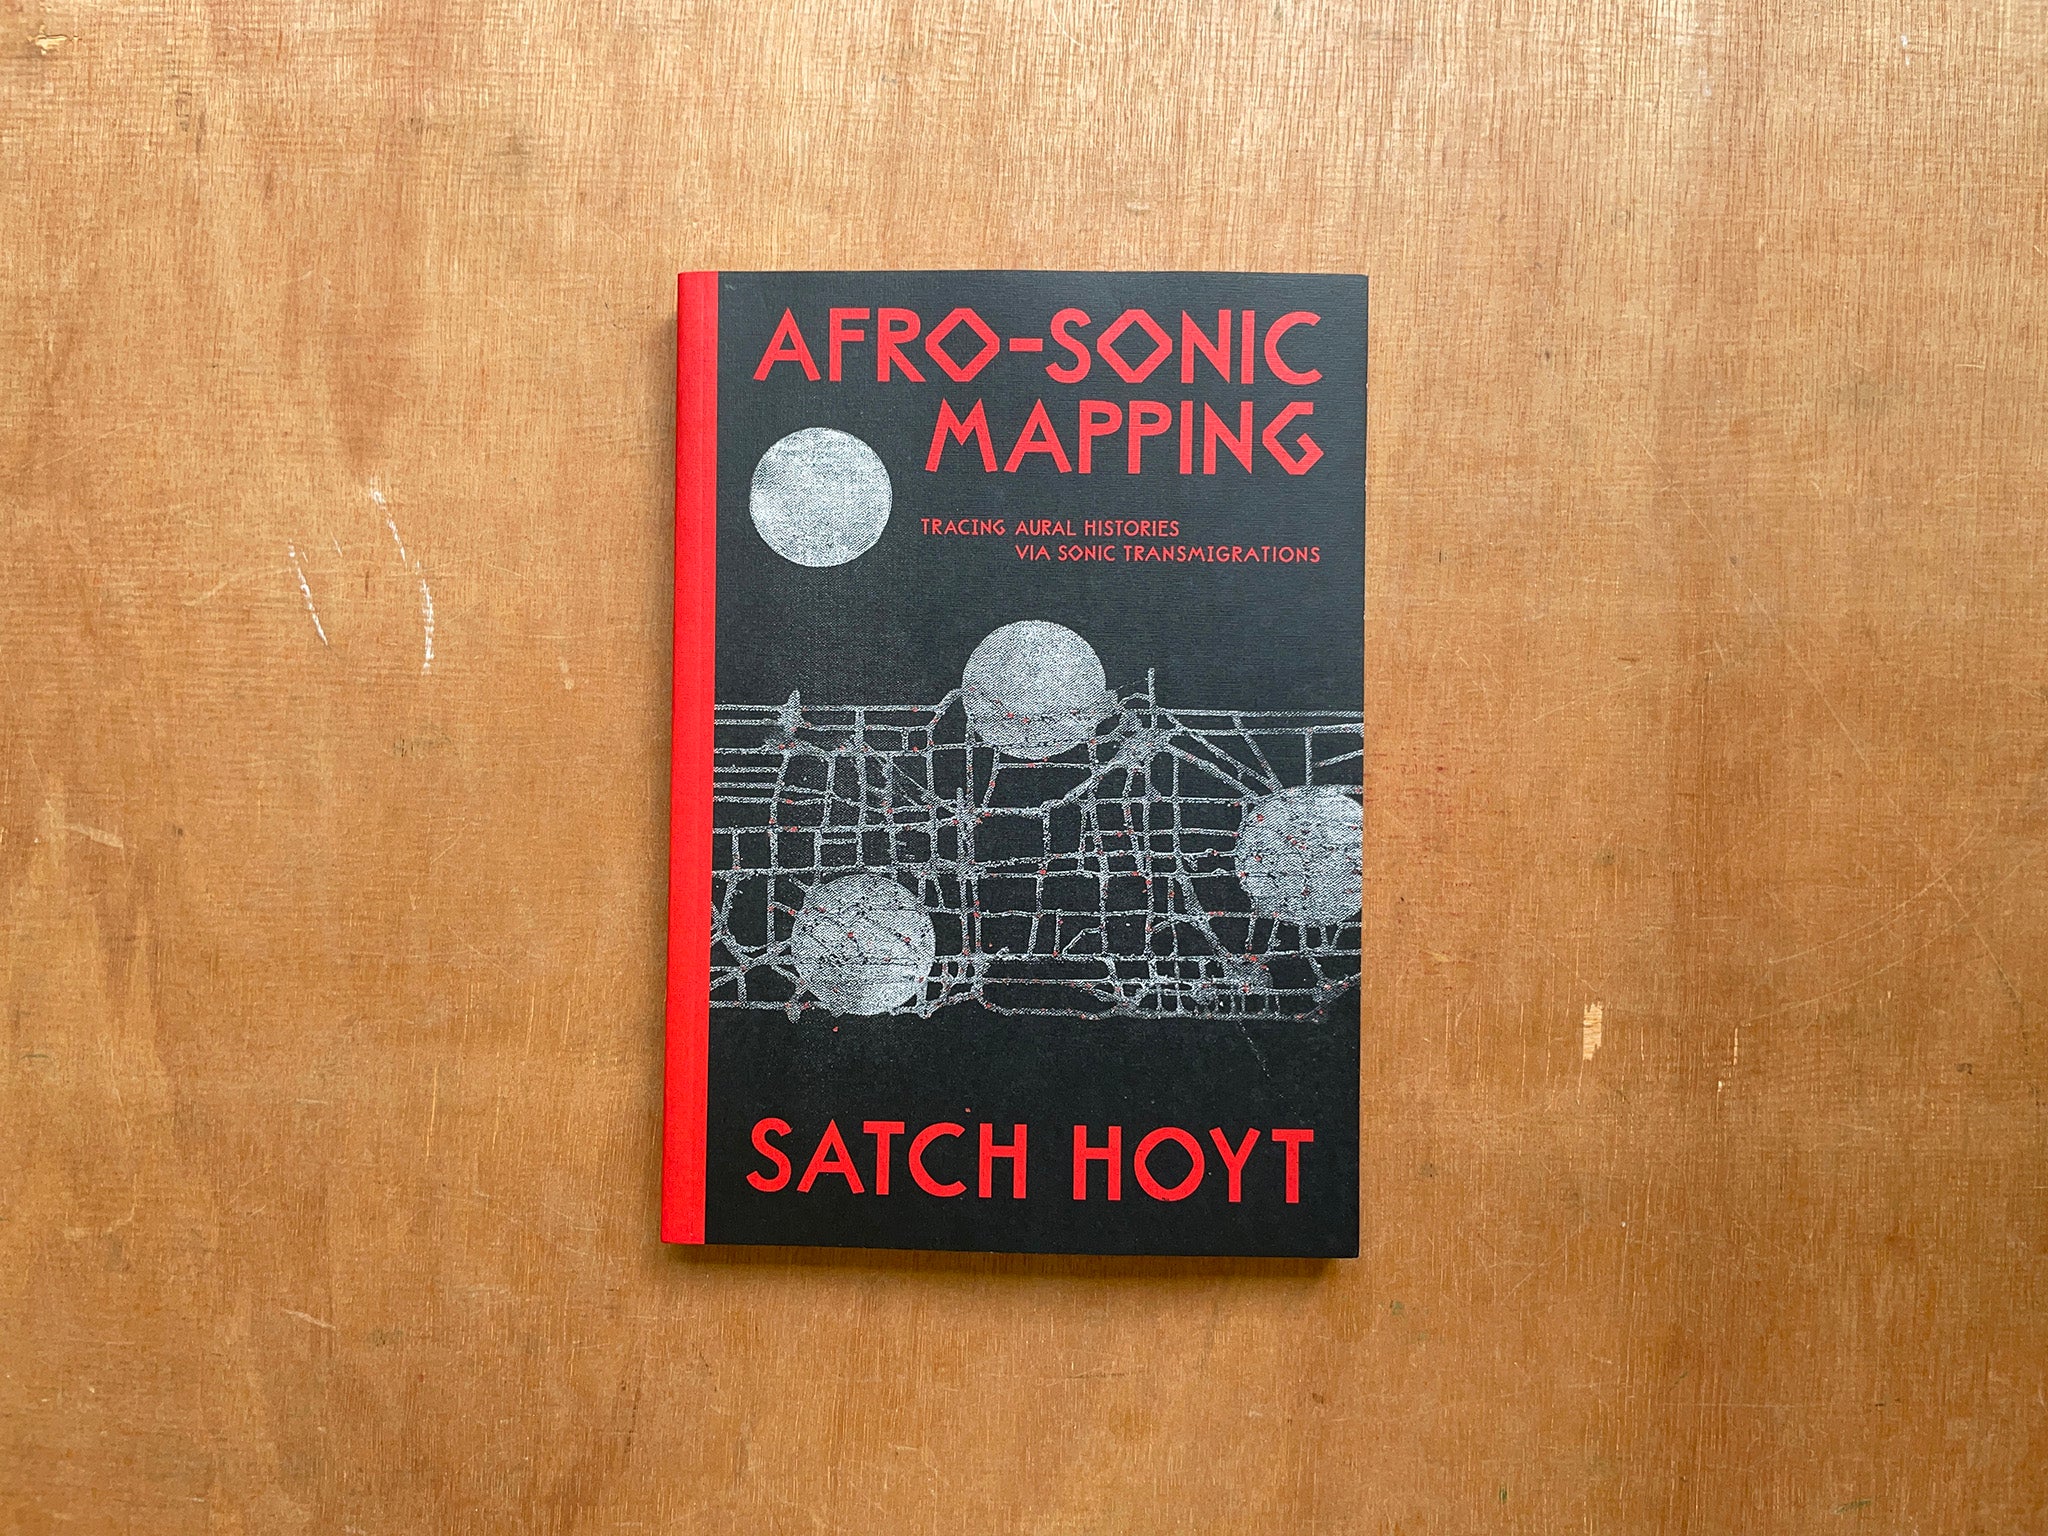 AFRO-SONIC MAPPING – TRACING AURAL HISTORIES VIA SONIC TRANSMIGRATIONS by Satch Hoyt